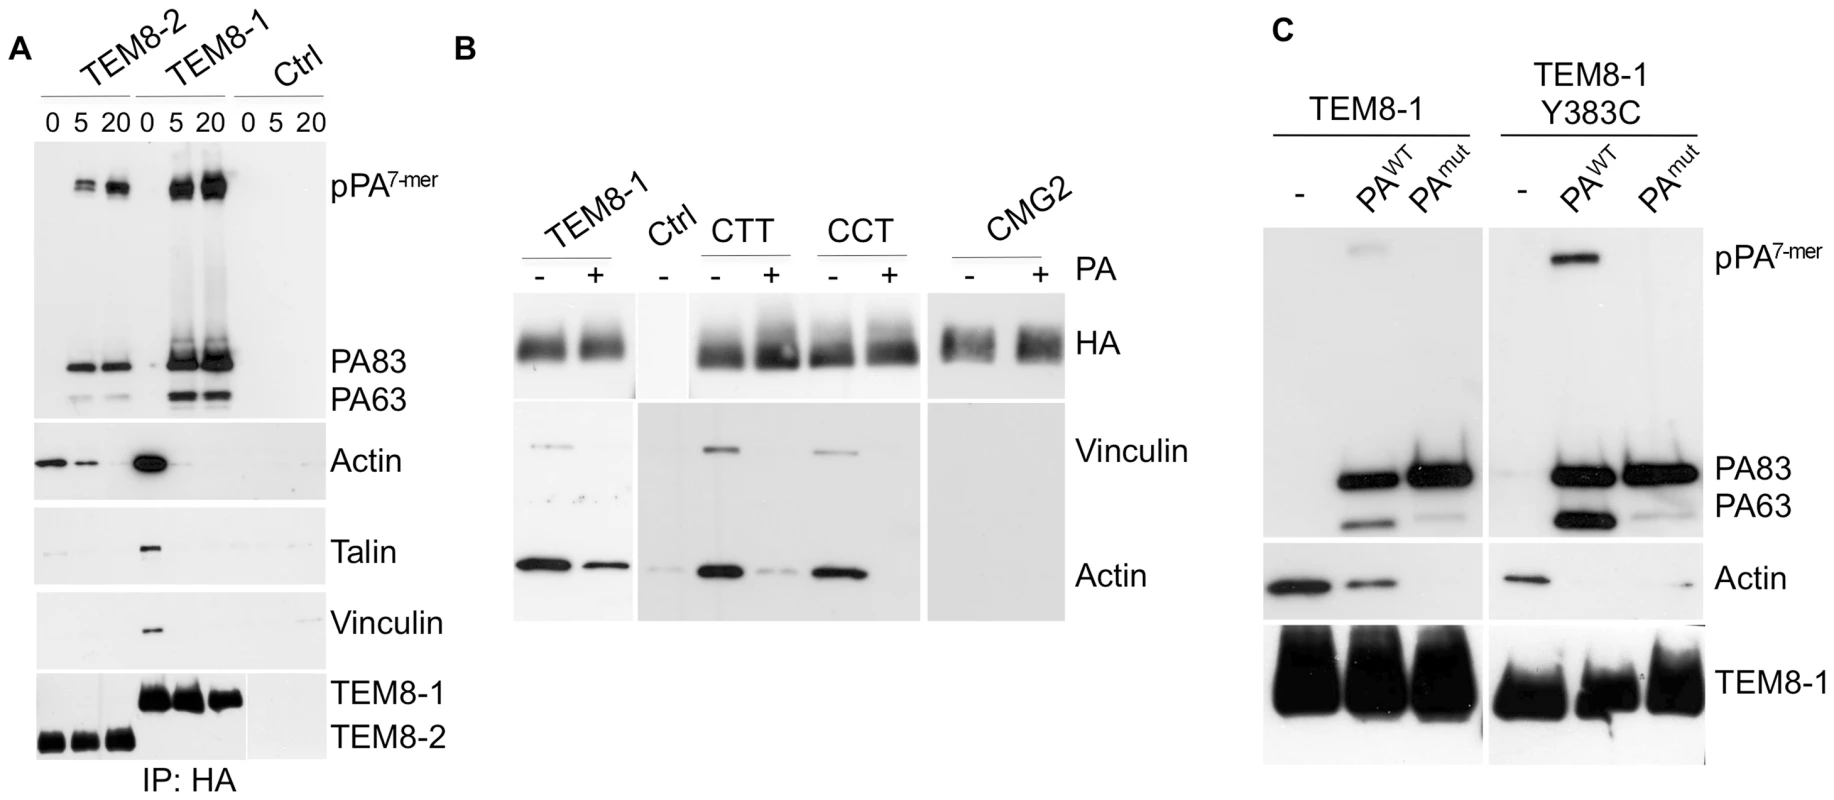 Binding of PA leads to the release of the actin-interacting complex form the cytosolic tail of TEM8.